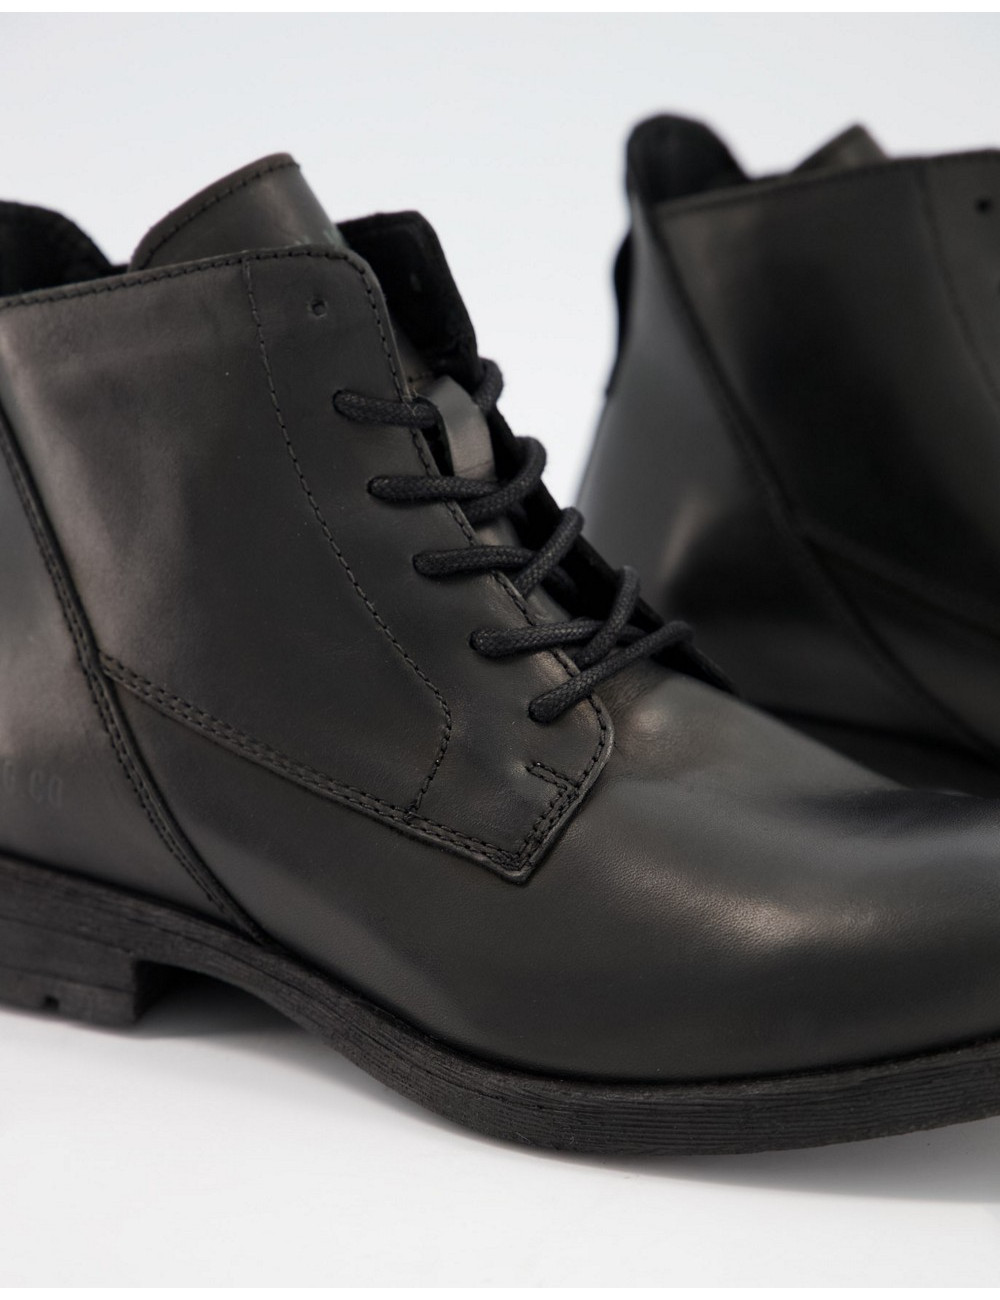 Replay leather lace up boots